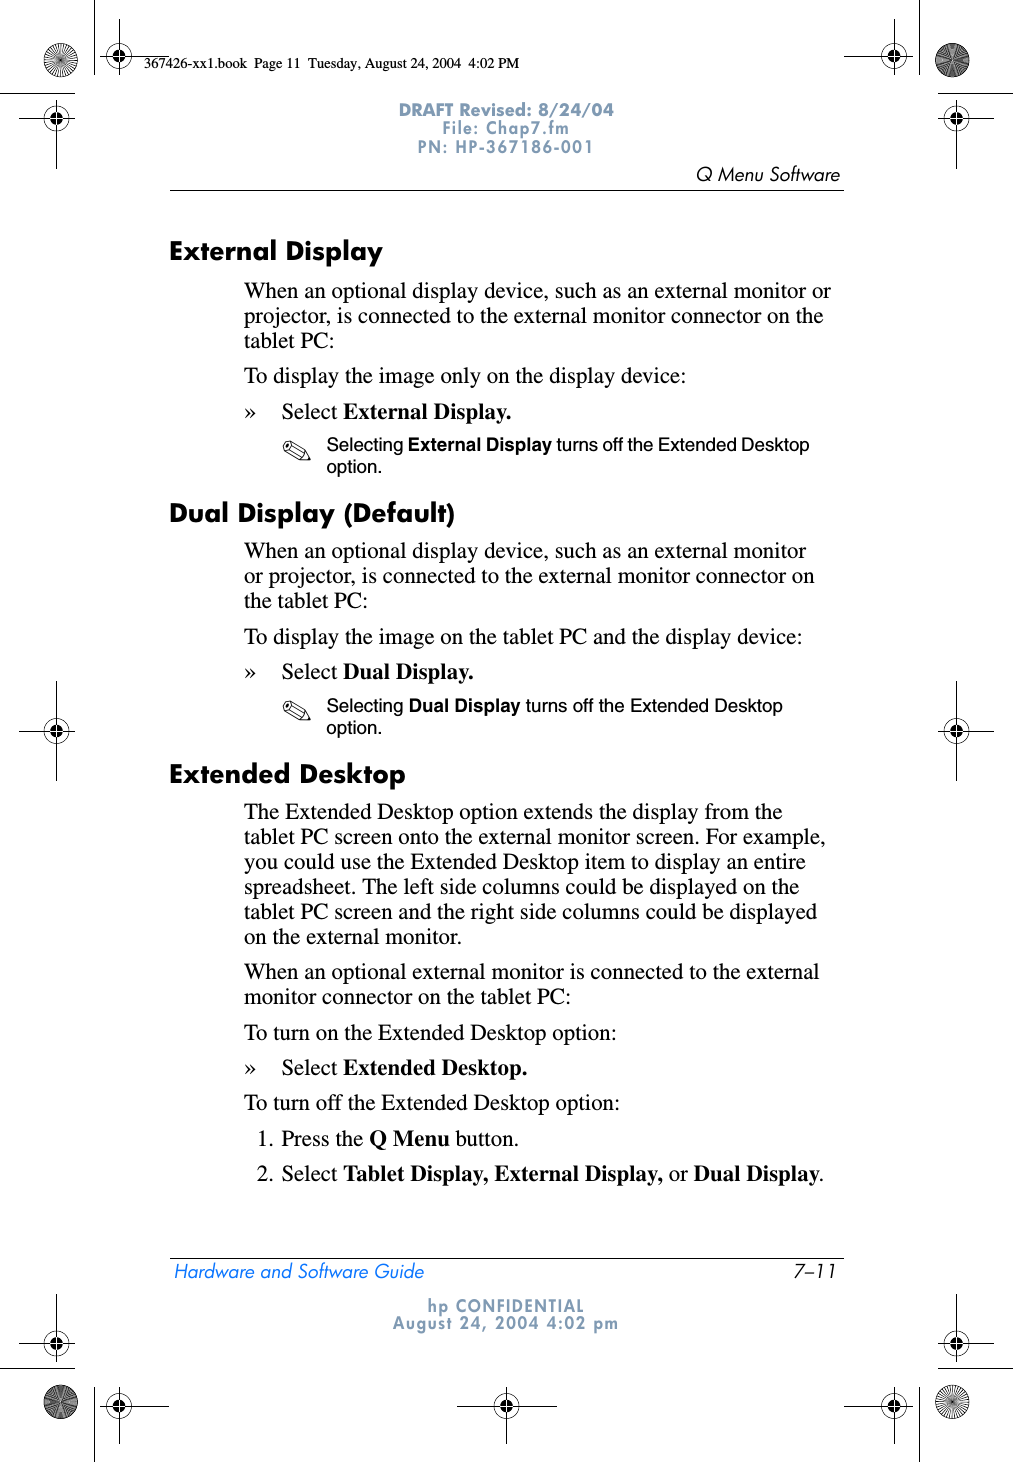 Q Menu SoftwareHardware and Software Guide 7–11DRAFT Revised: 8/24/04File: Chap7.fm PN: HP-367186-001 hp CONFIDENTIALAugust 24, 2004 4:02 pmExternal Display When an optional display device, such as an external monitor or projector, is connected to the external monitor connector on the tablet PC:To display the image only on the display device:»Select External Display.✎Selecting External Display turns off the Extended Desktop option.Dual Display (Default)When an optional display device, such as an external monitor or projector, is connected to the external monitor connector on the tablet PC:To display the image on the tablet PC and the display device:»Select Dual Display.✎Selecting Dual Display turns off the Extended Desktop option.Extended DesktopThe Extended Desktop option extends the display from the tablet PC screen onto the external monitor screen. For example, you could use the Extended Desktop item to display an entire spreadsheet. The left side columns could be displayed on the tablet PC screen and the right side columns could be displayed on the external monitor.When an optional external monitor is connected to the external monitor connector on the tablet PC:To turn on the Extended Desktop option:»Select Extended Desktop.To turn off the Extended Desktop option:1. Press the Q Menu button.2. Select Tablet Display, External Display, or Dual Display.367426-xx1.book  Page 11  Tuesday, August 24, 2004  4:02 PM